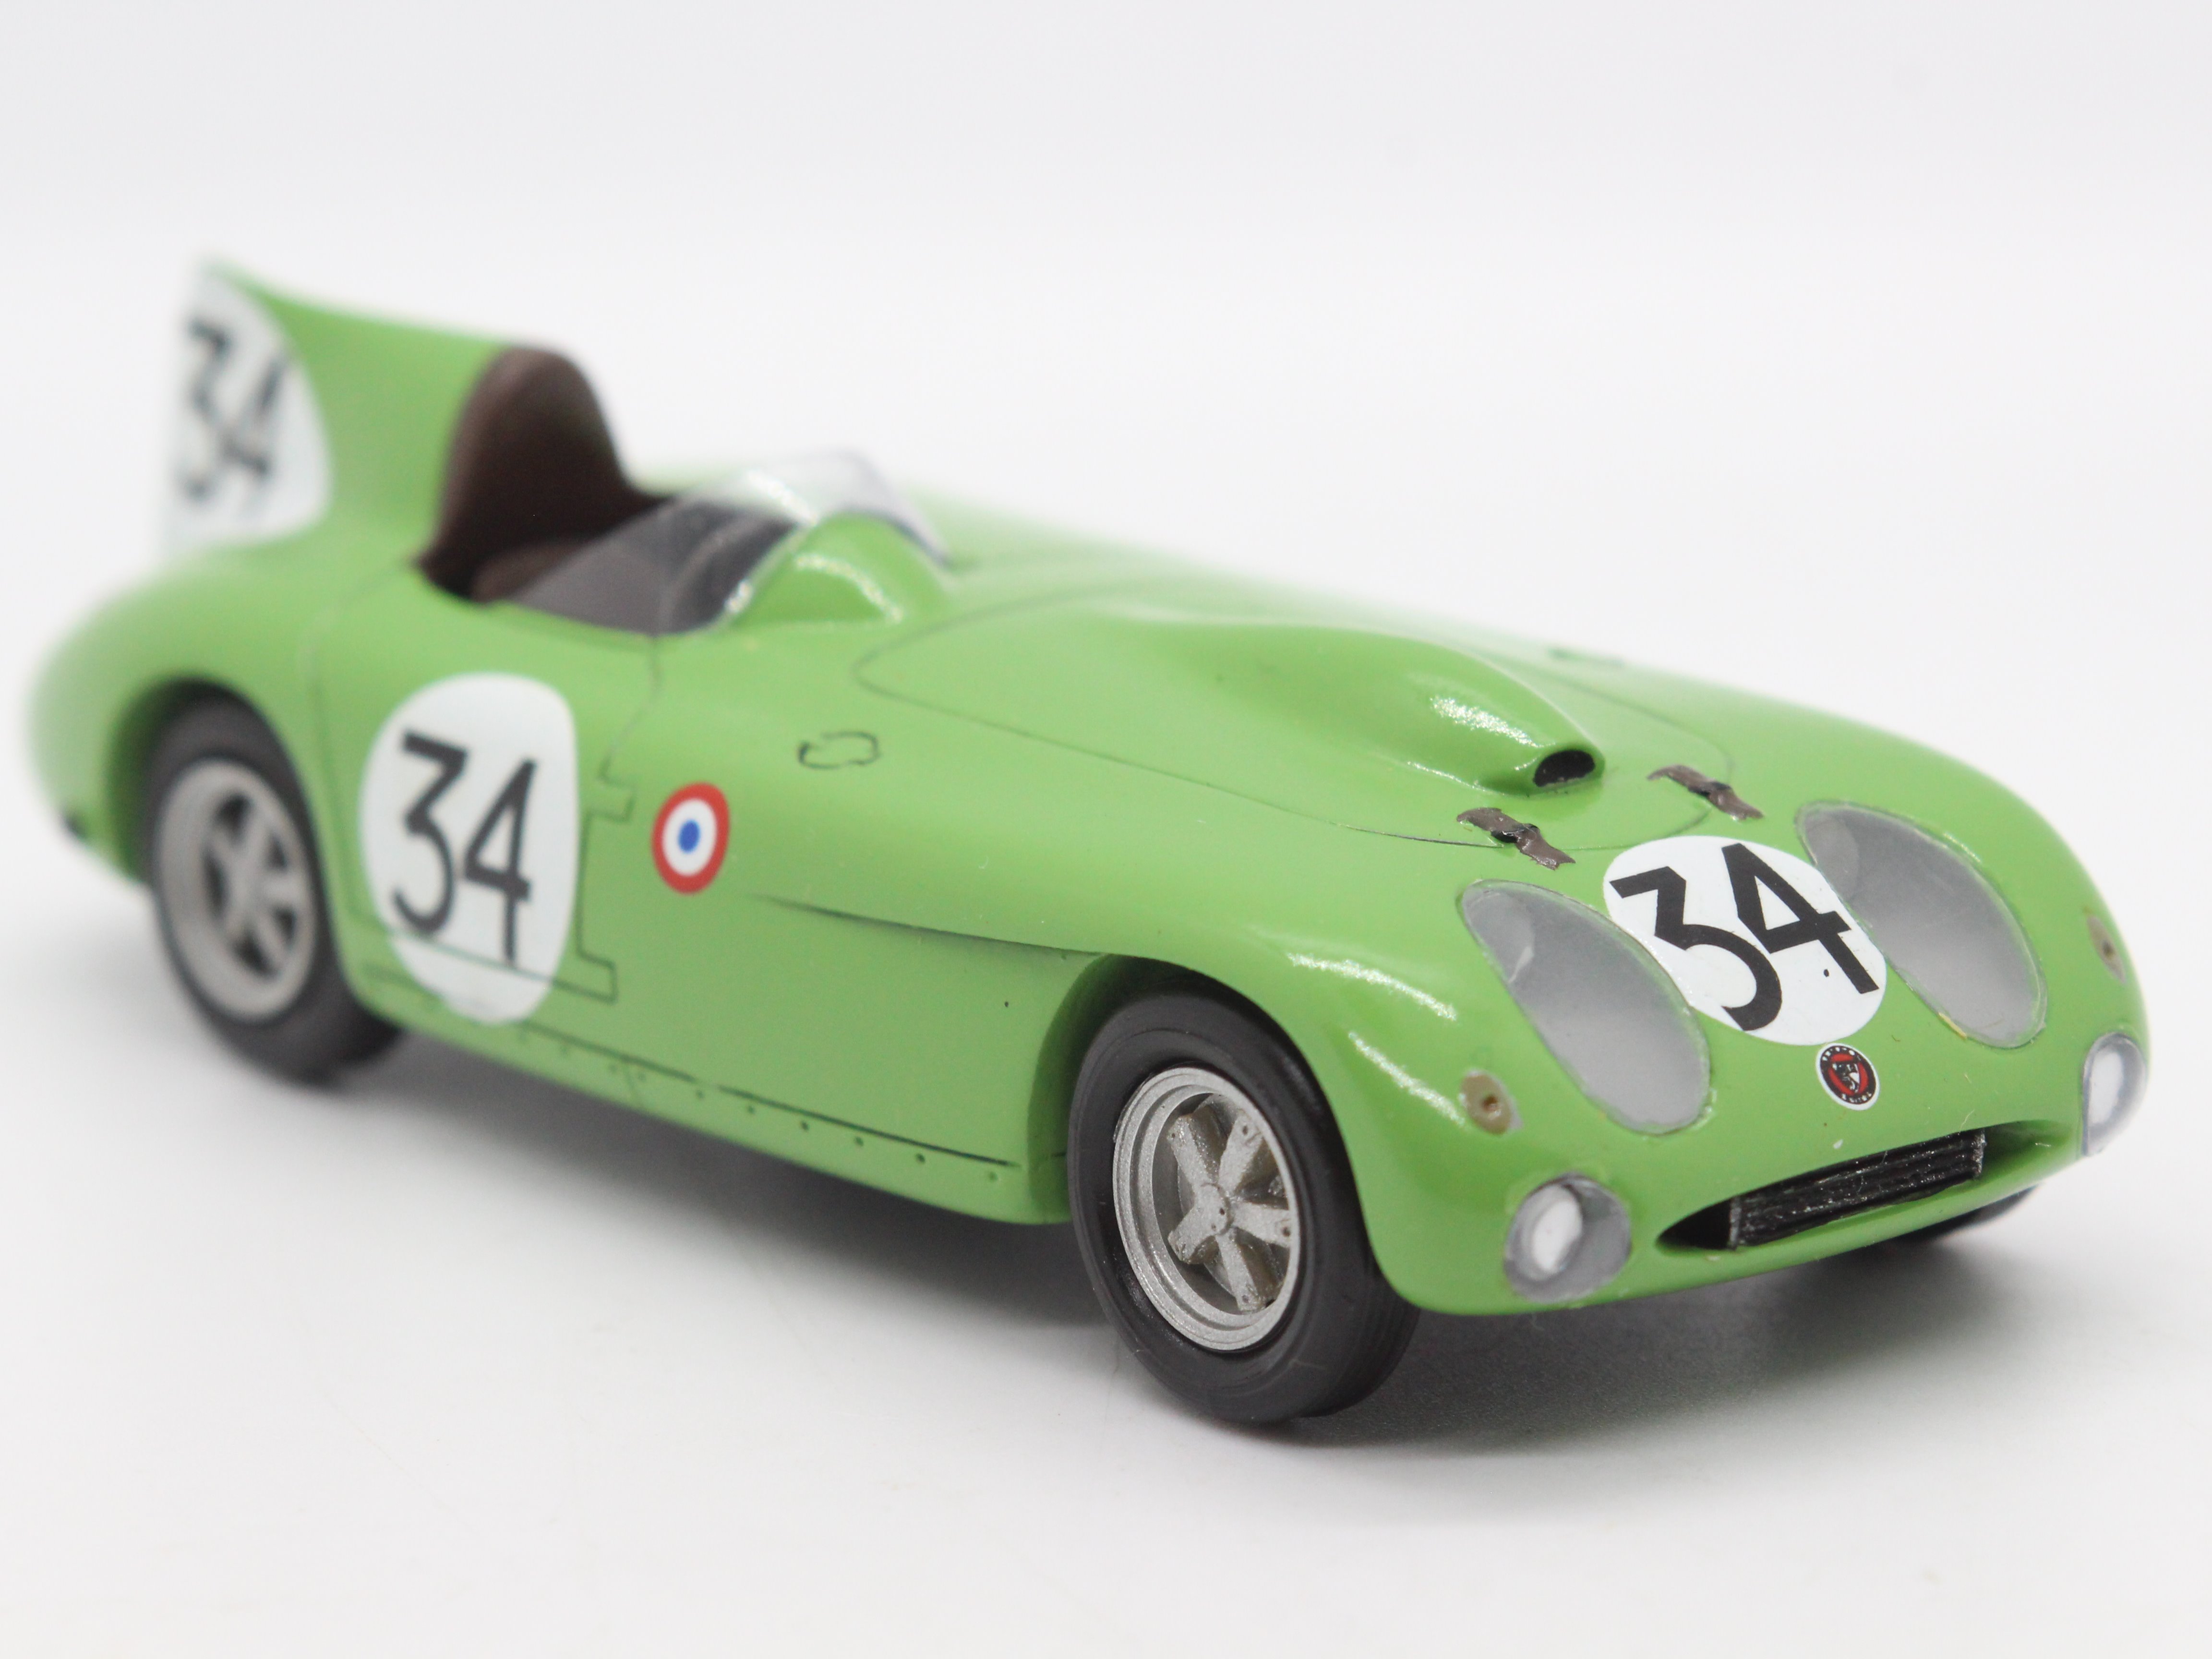 Provence Moulage - MPH Models - # 286 - A boxed 1:43 scale resin model Bristol 450C 1955 Le Mans - Image 4 of 12